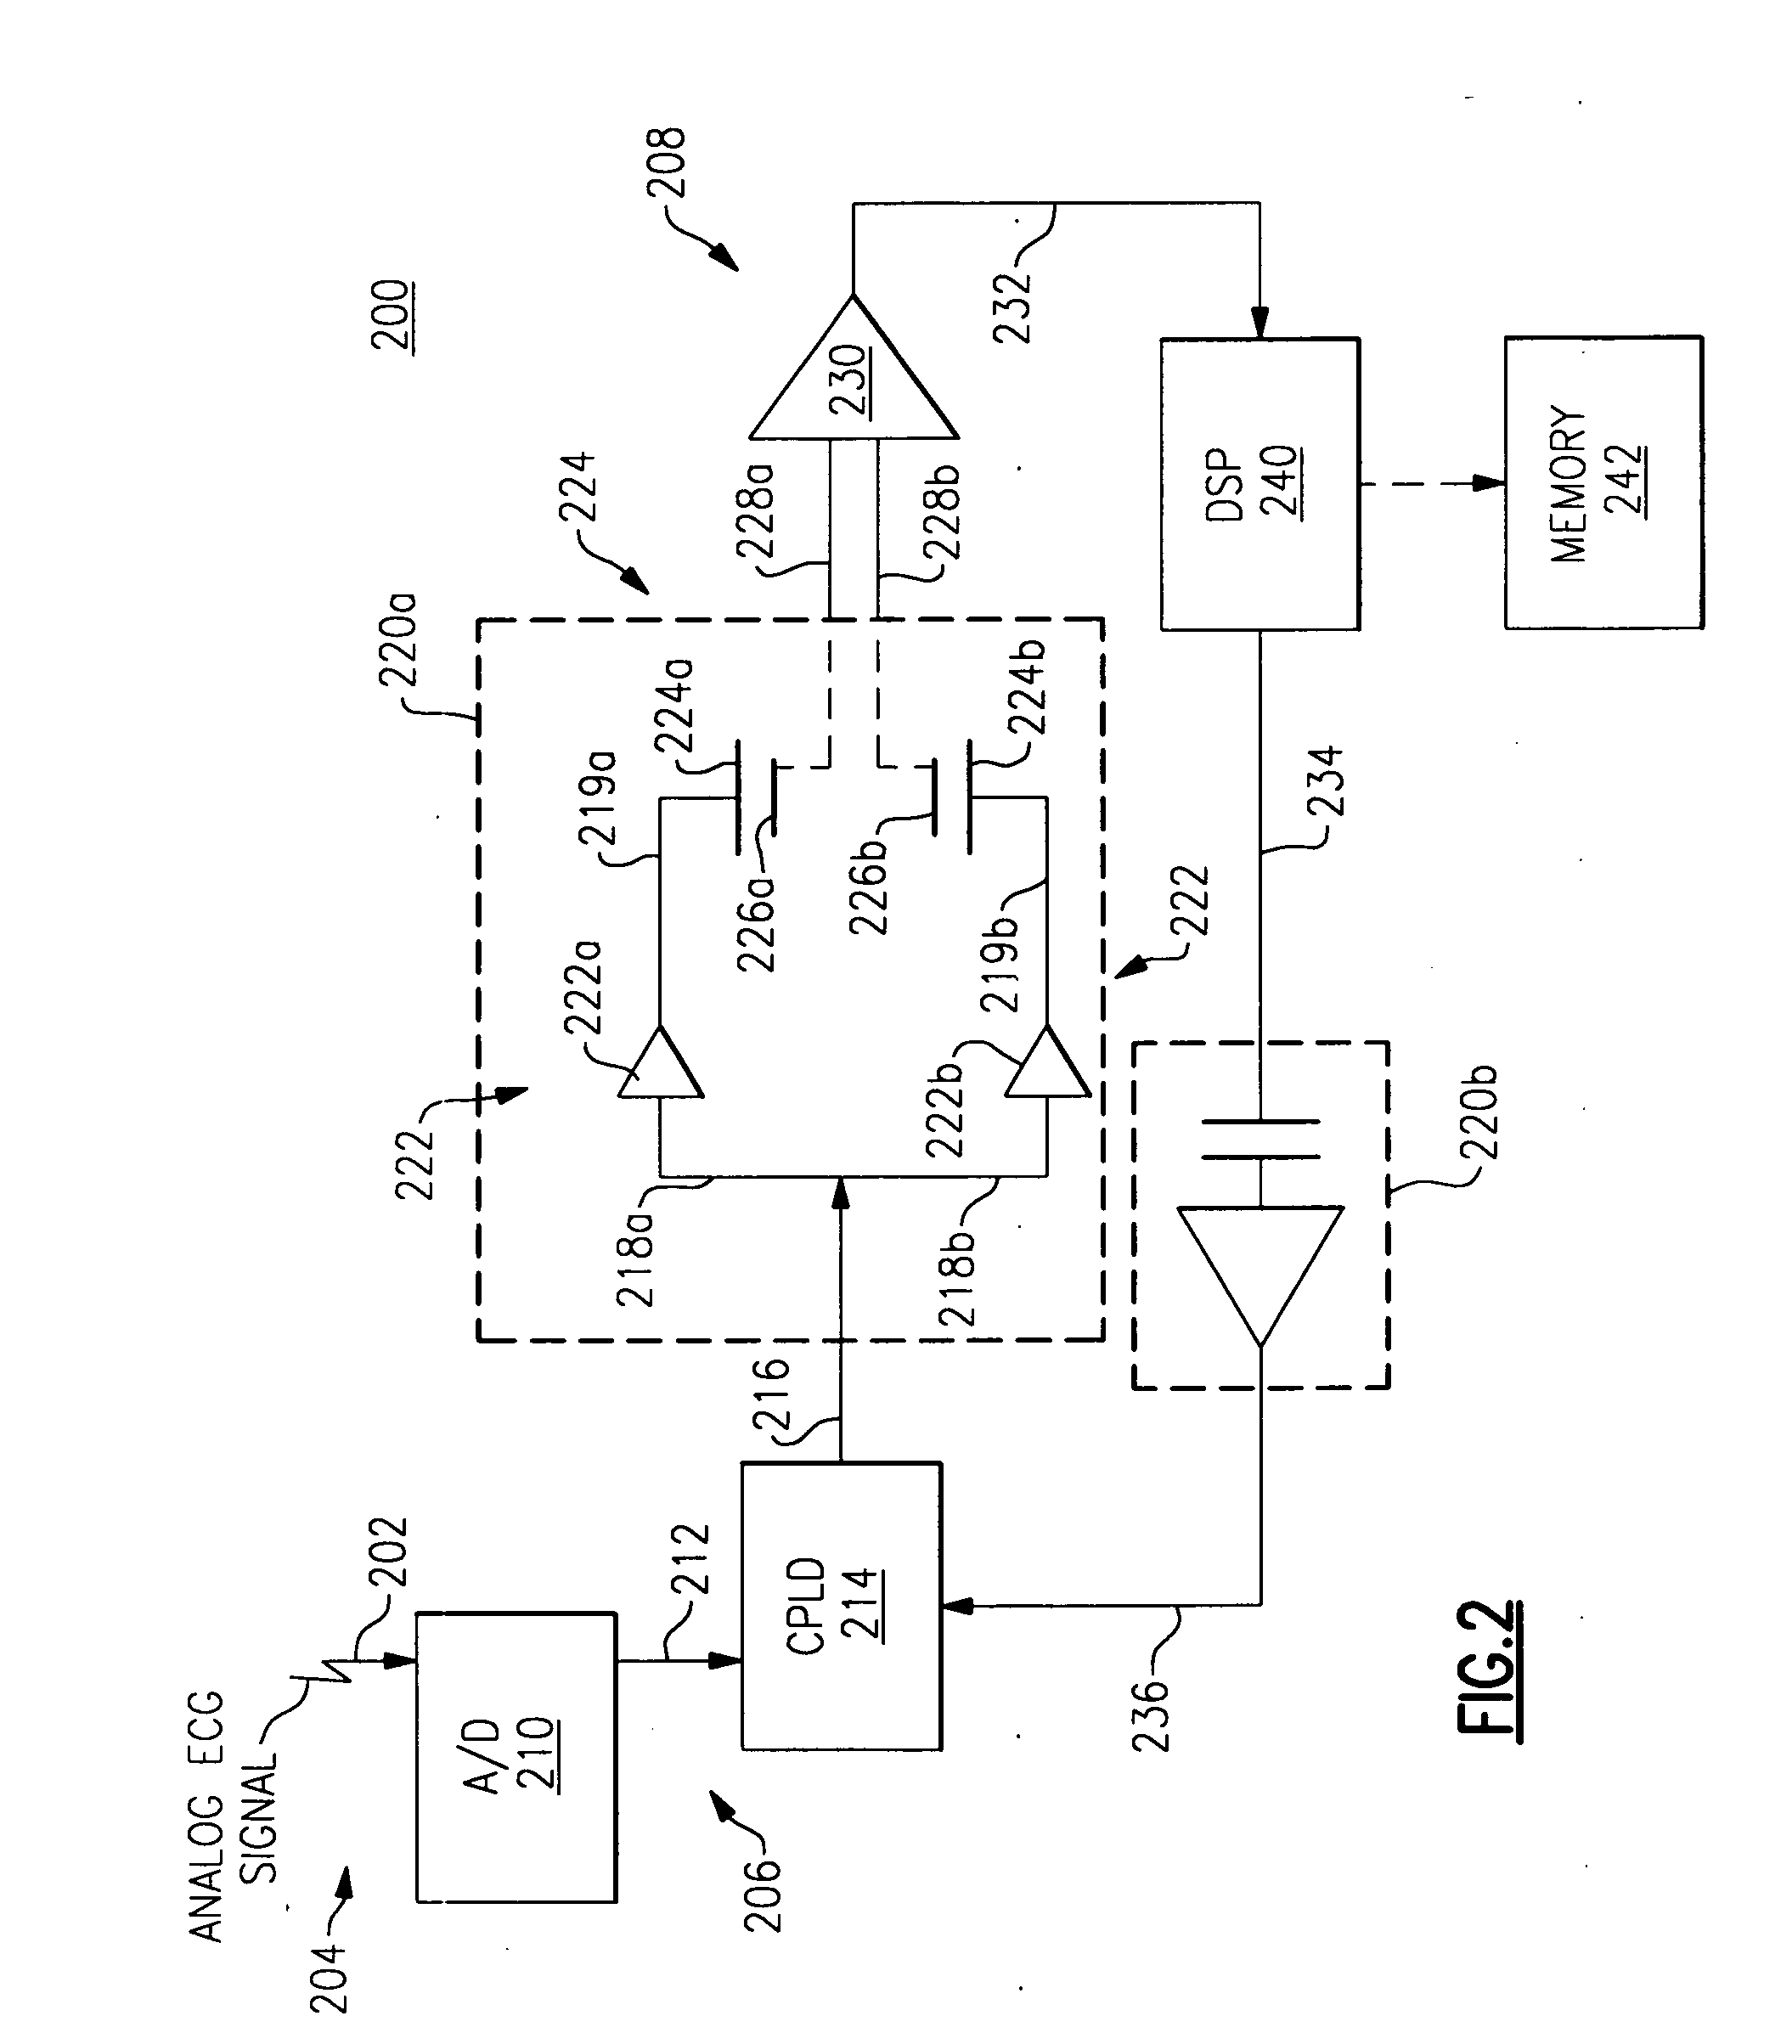 Galvanic isolation of a signal using capacitive coupling embeded within a circuit board